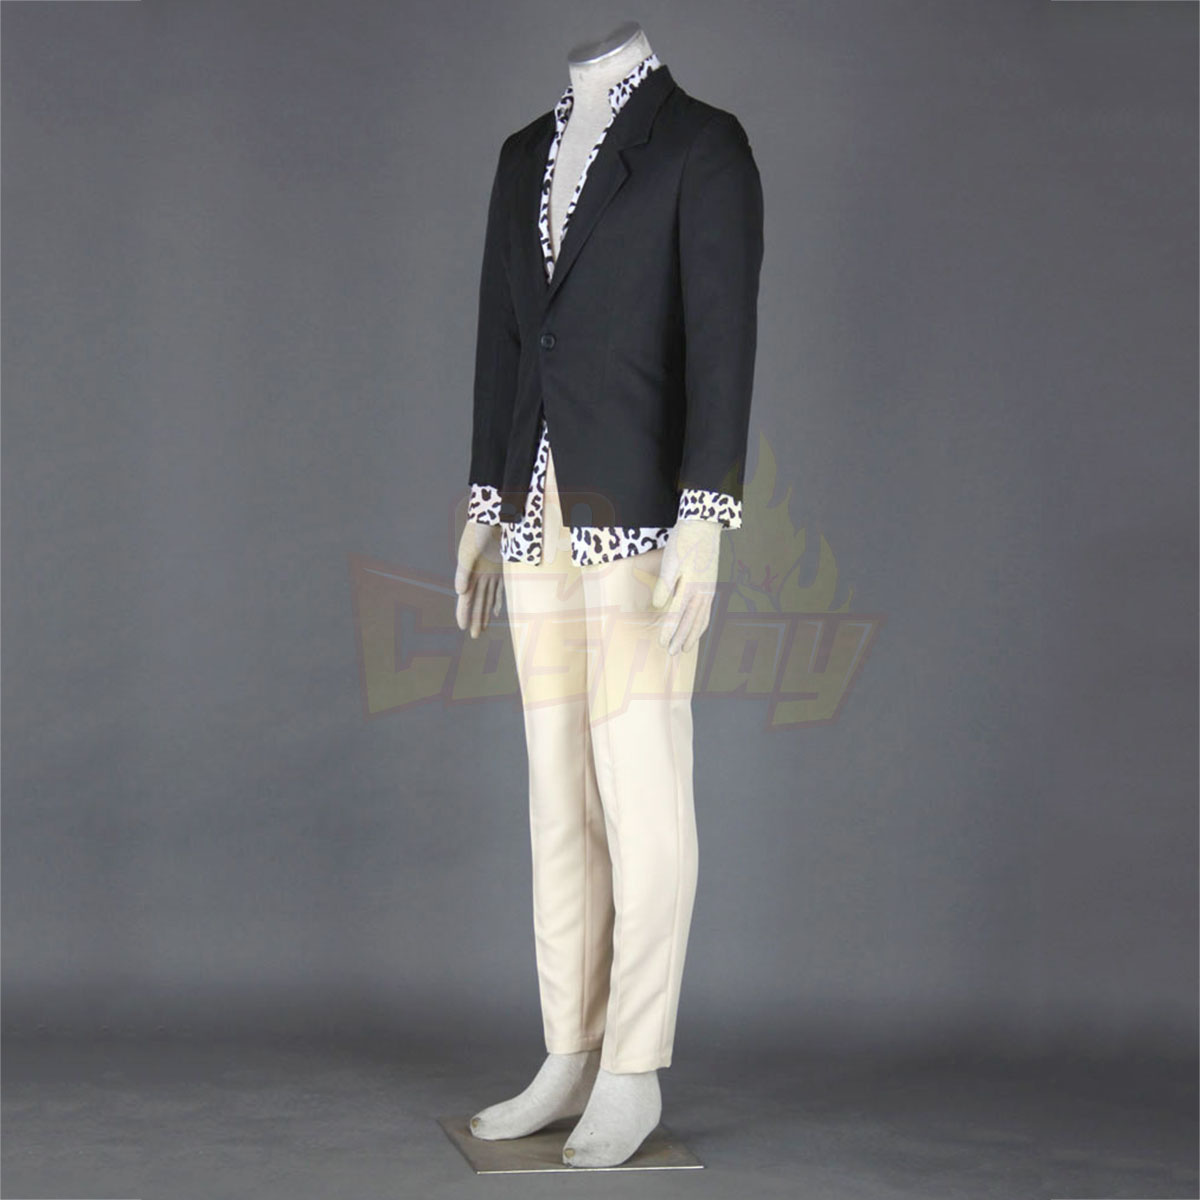 Hitman Reborn Ranbo 1ST Cosplay Costumes Deluxe Edition